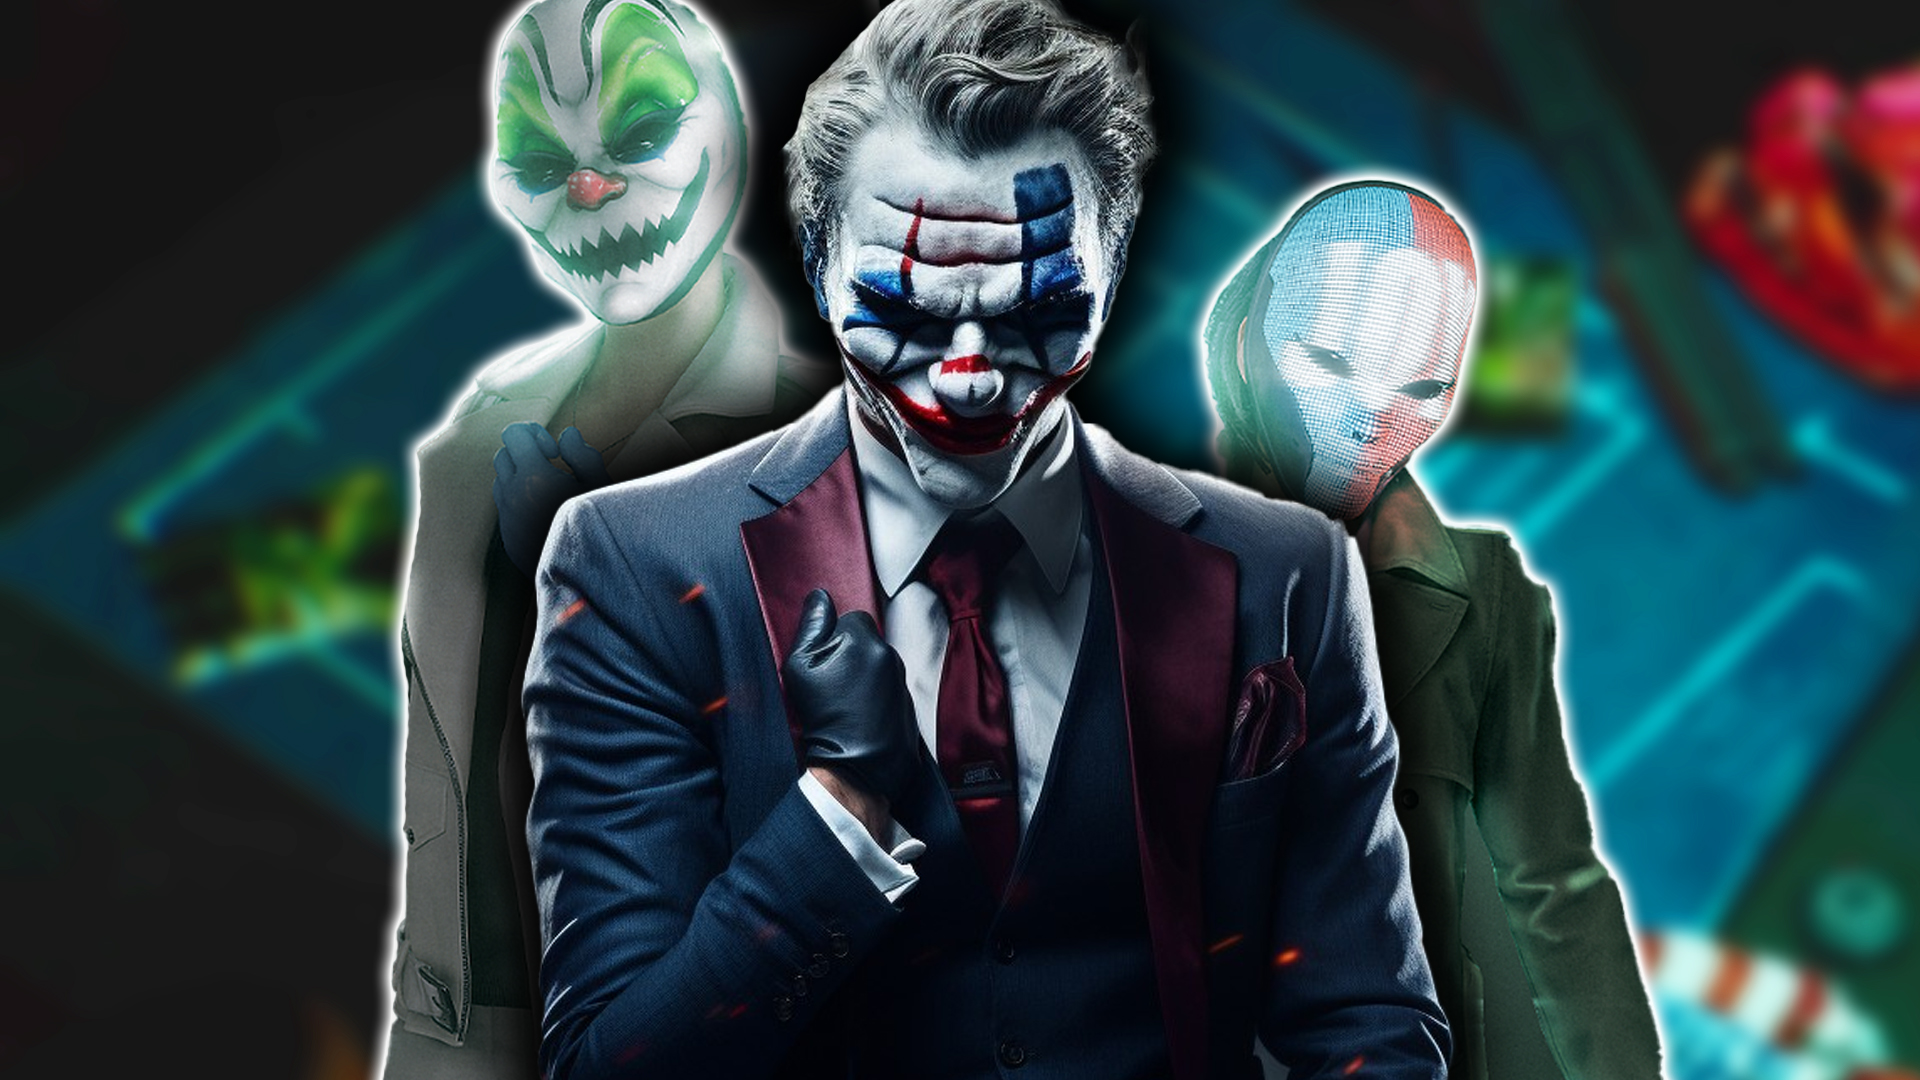 Payday 3's next patch isn't until next week as server issues continue